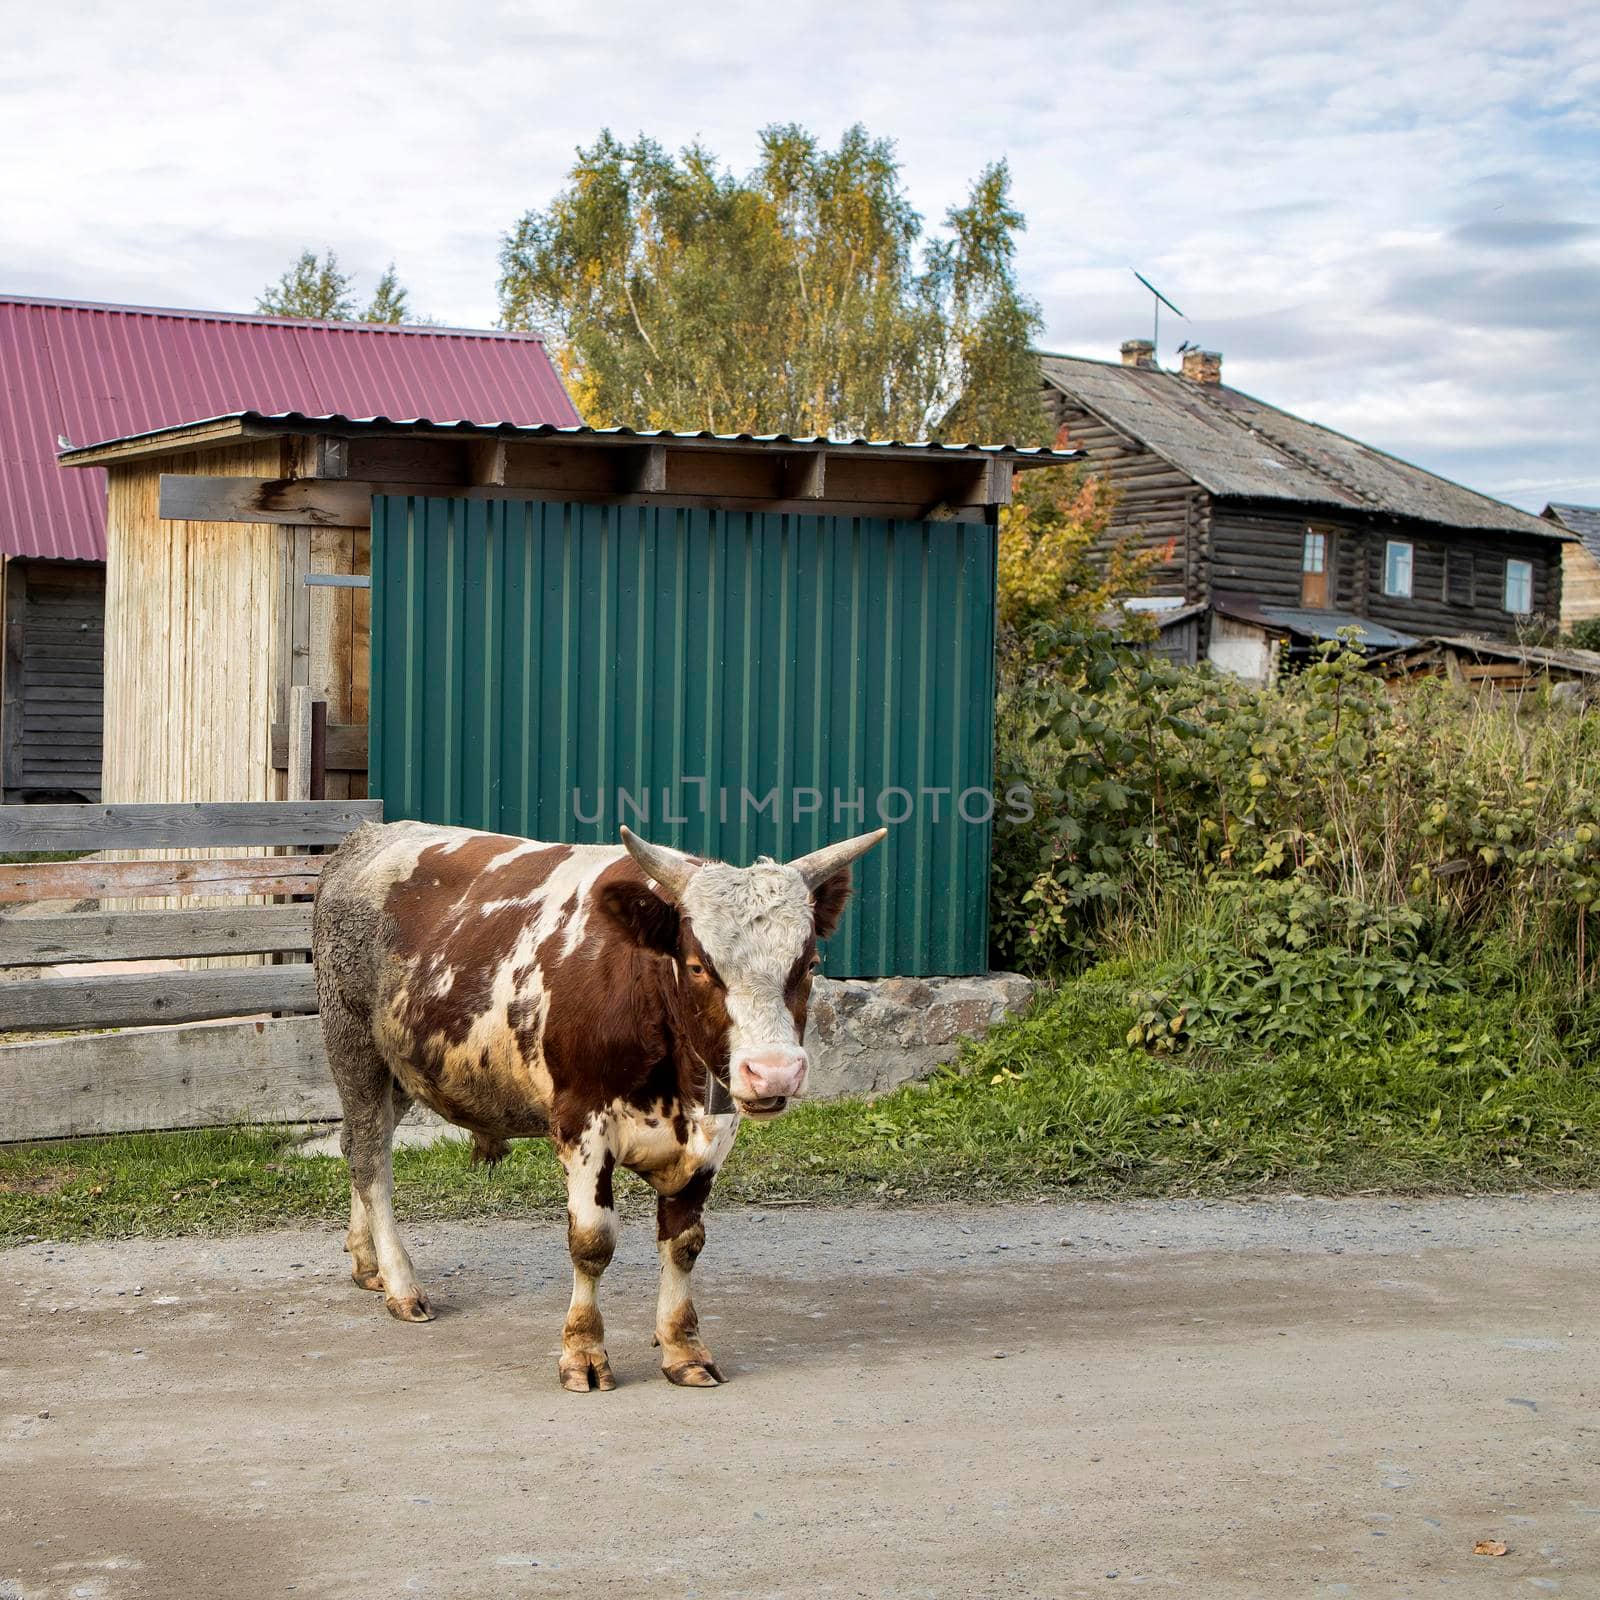 A bull grazes on the street of a Karelian village. Ayrshire cattle are a breed of dairy cattle from Ayrshire in southwest Scotland.